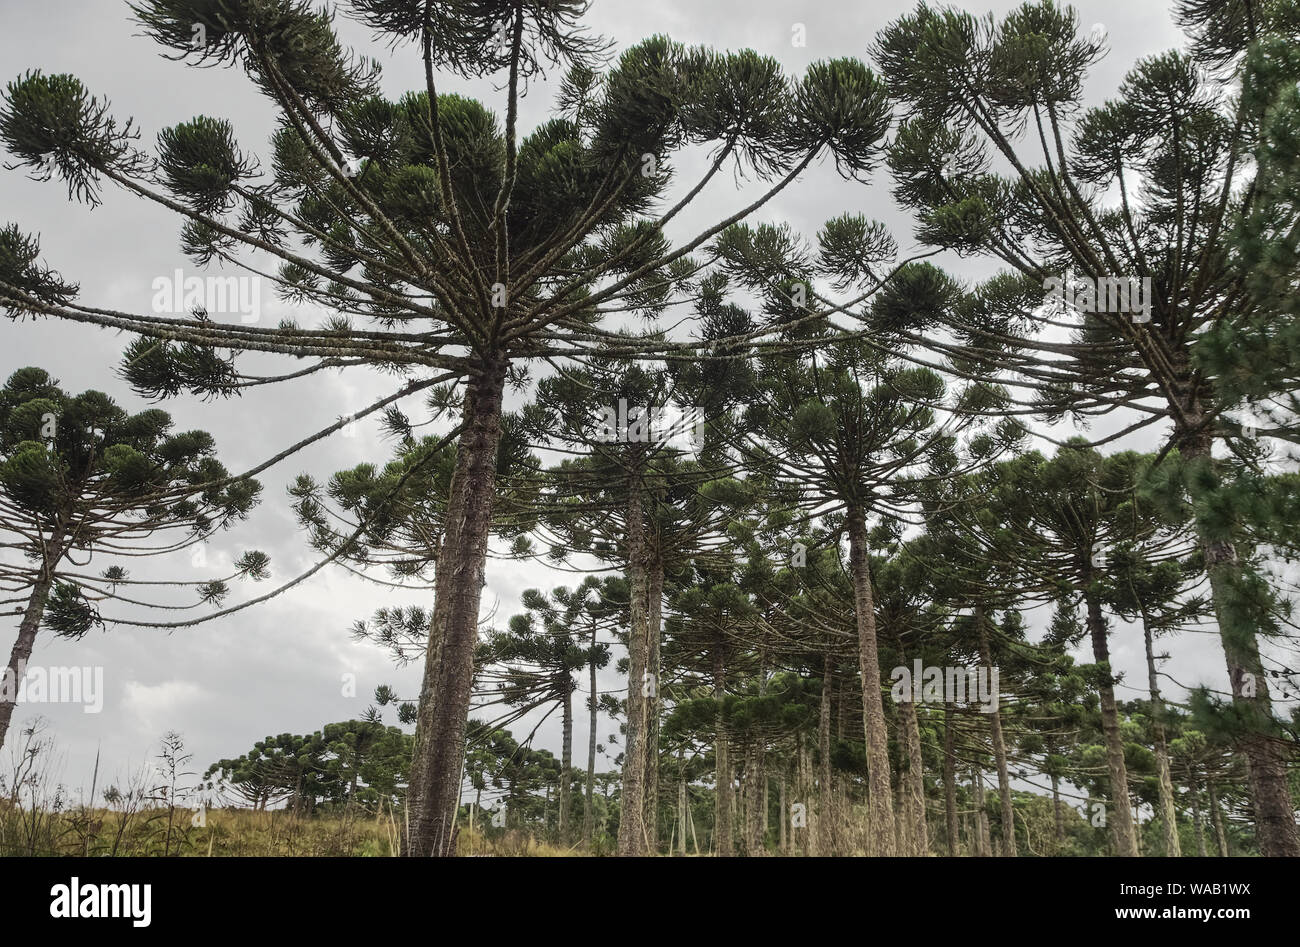 A remote Araucária forest (Araucaria angustifolia). The coniferous trees are also know as the Parana Pine, Candelabra tree and Brazilian Pine. Stock Photo